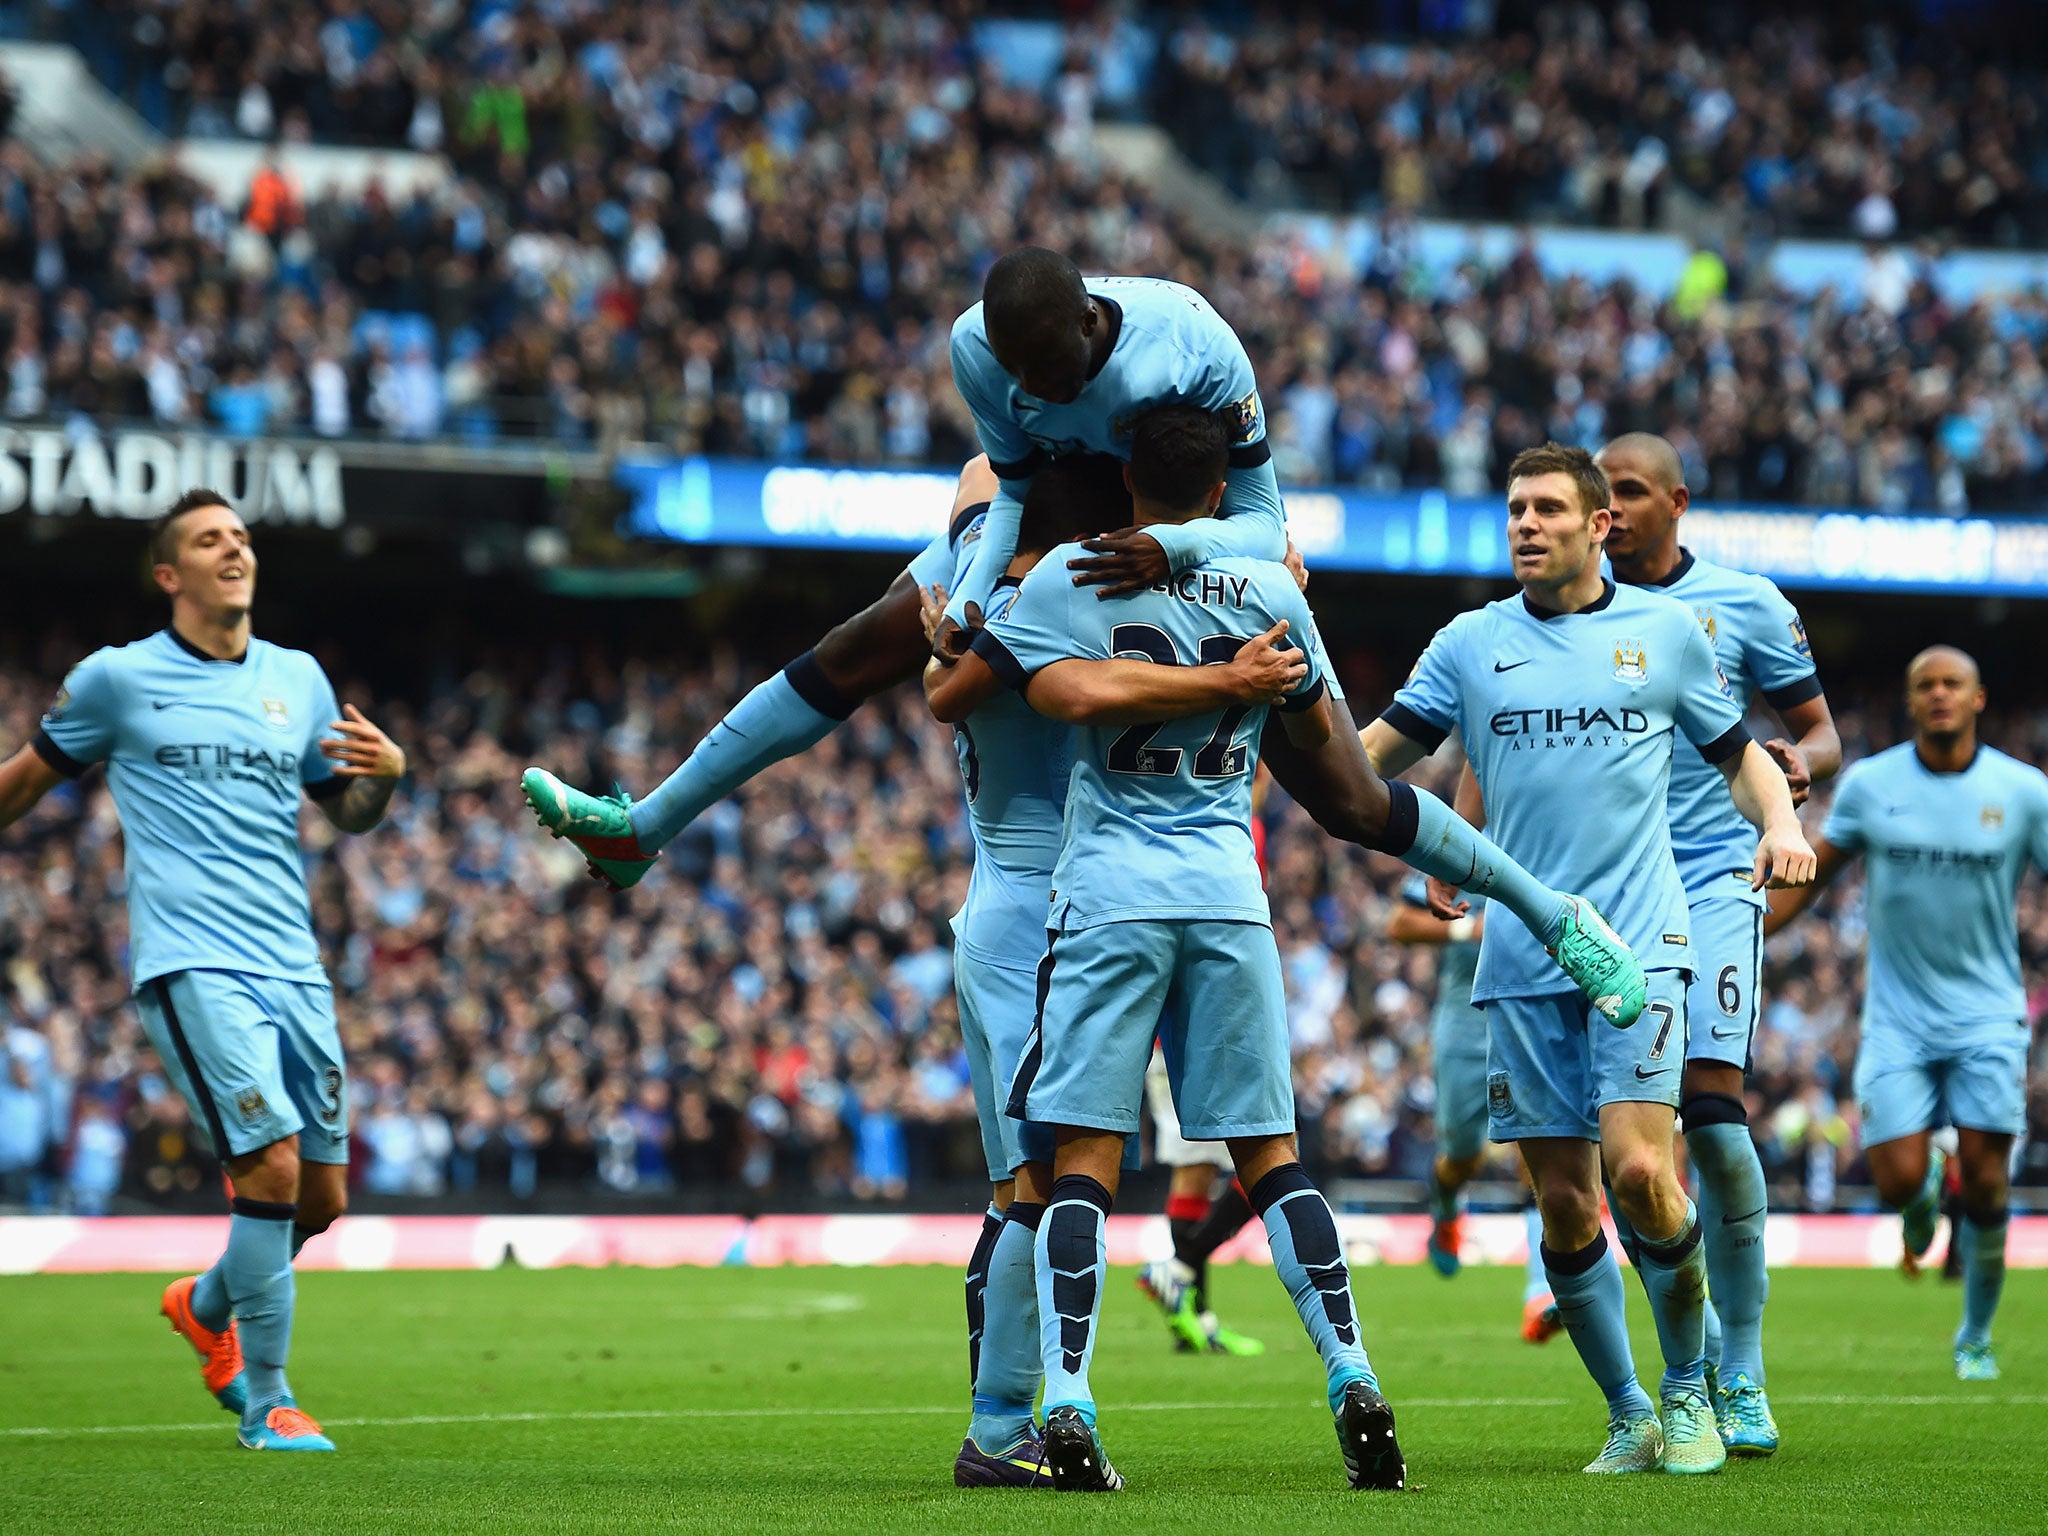 Manchester City midfielder Yaya Toure celebrates with his Manchester City team-mates